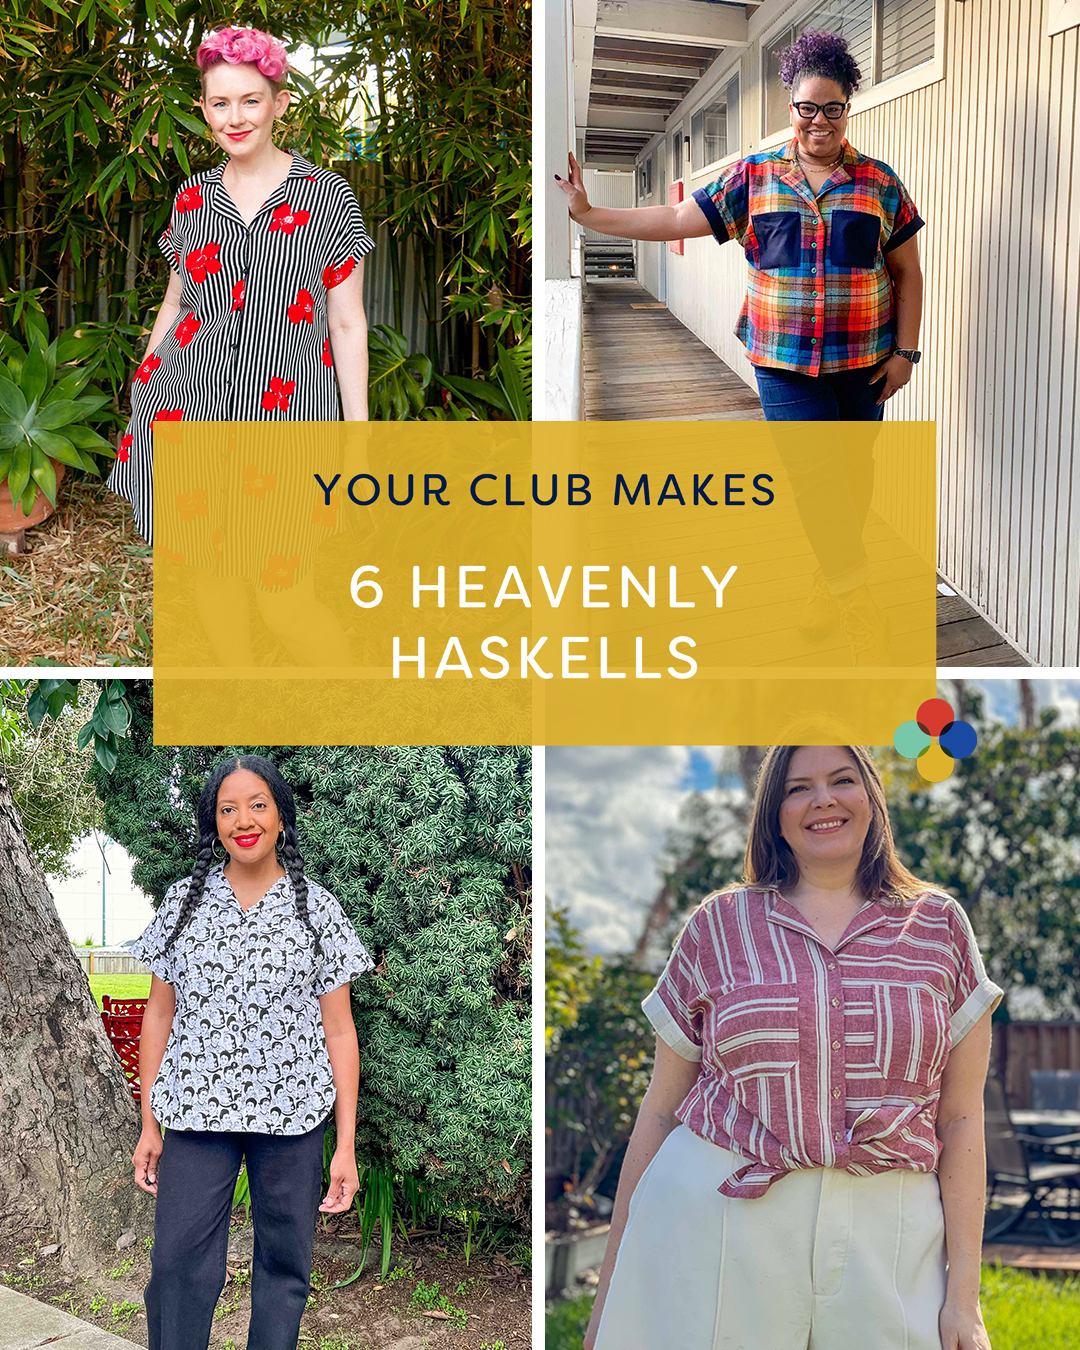 Haskell shirt makes main image, 4 women in Haskell shirts